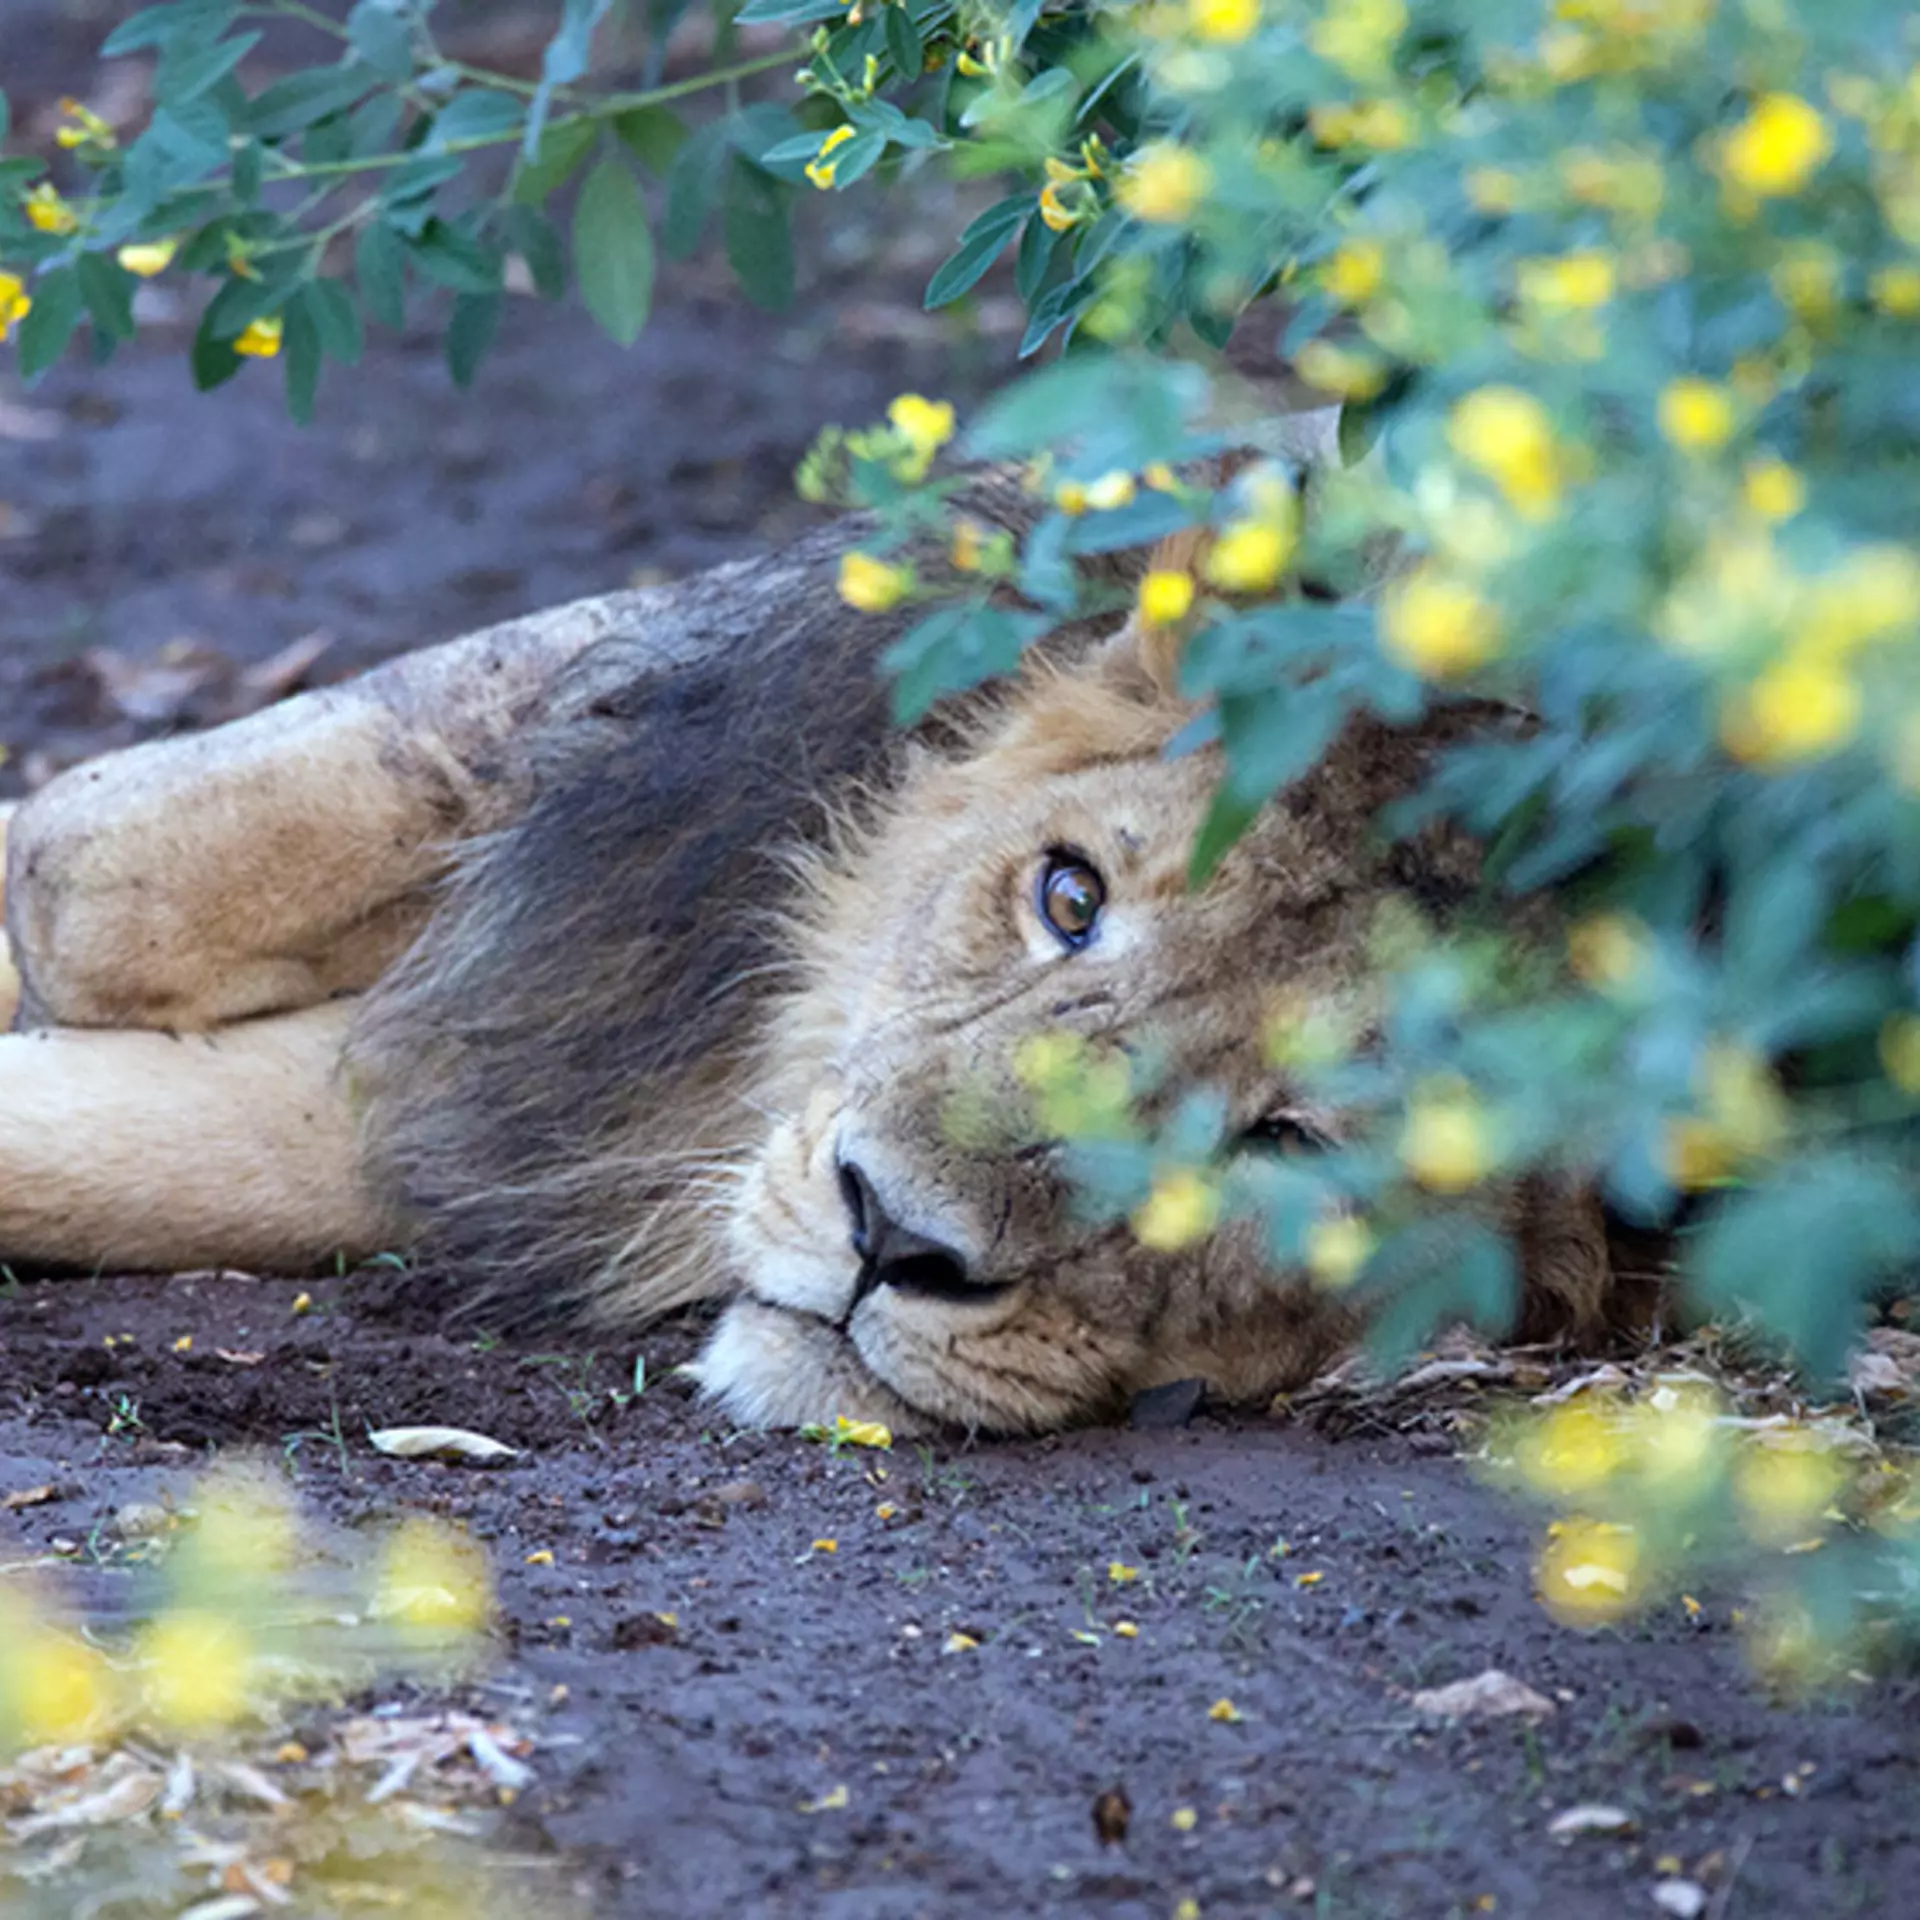 Asiatic lion male lying down in wild at a chickpea field